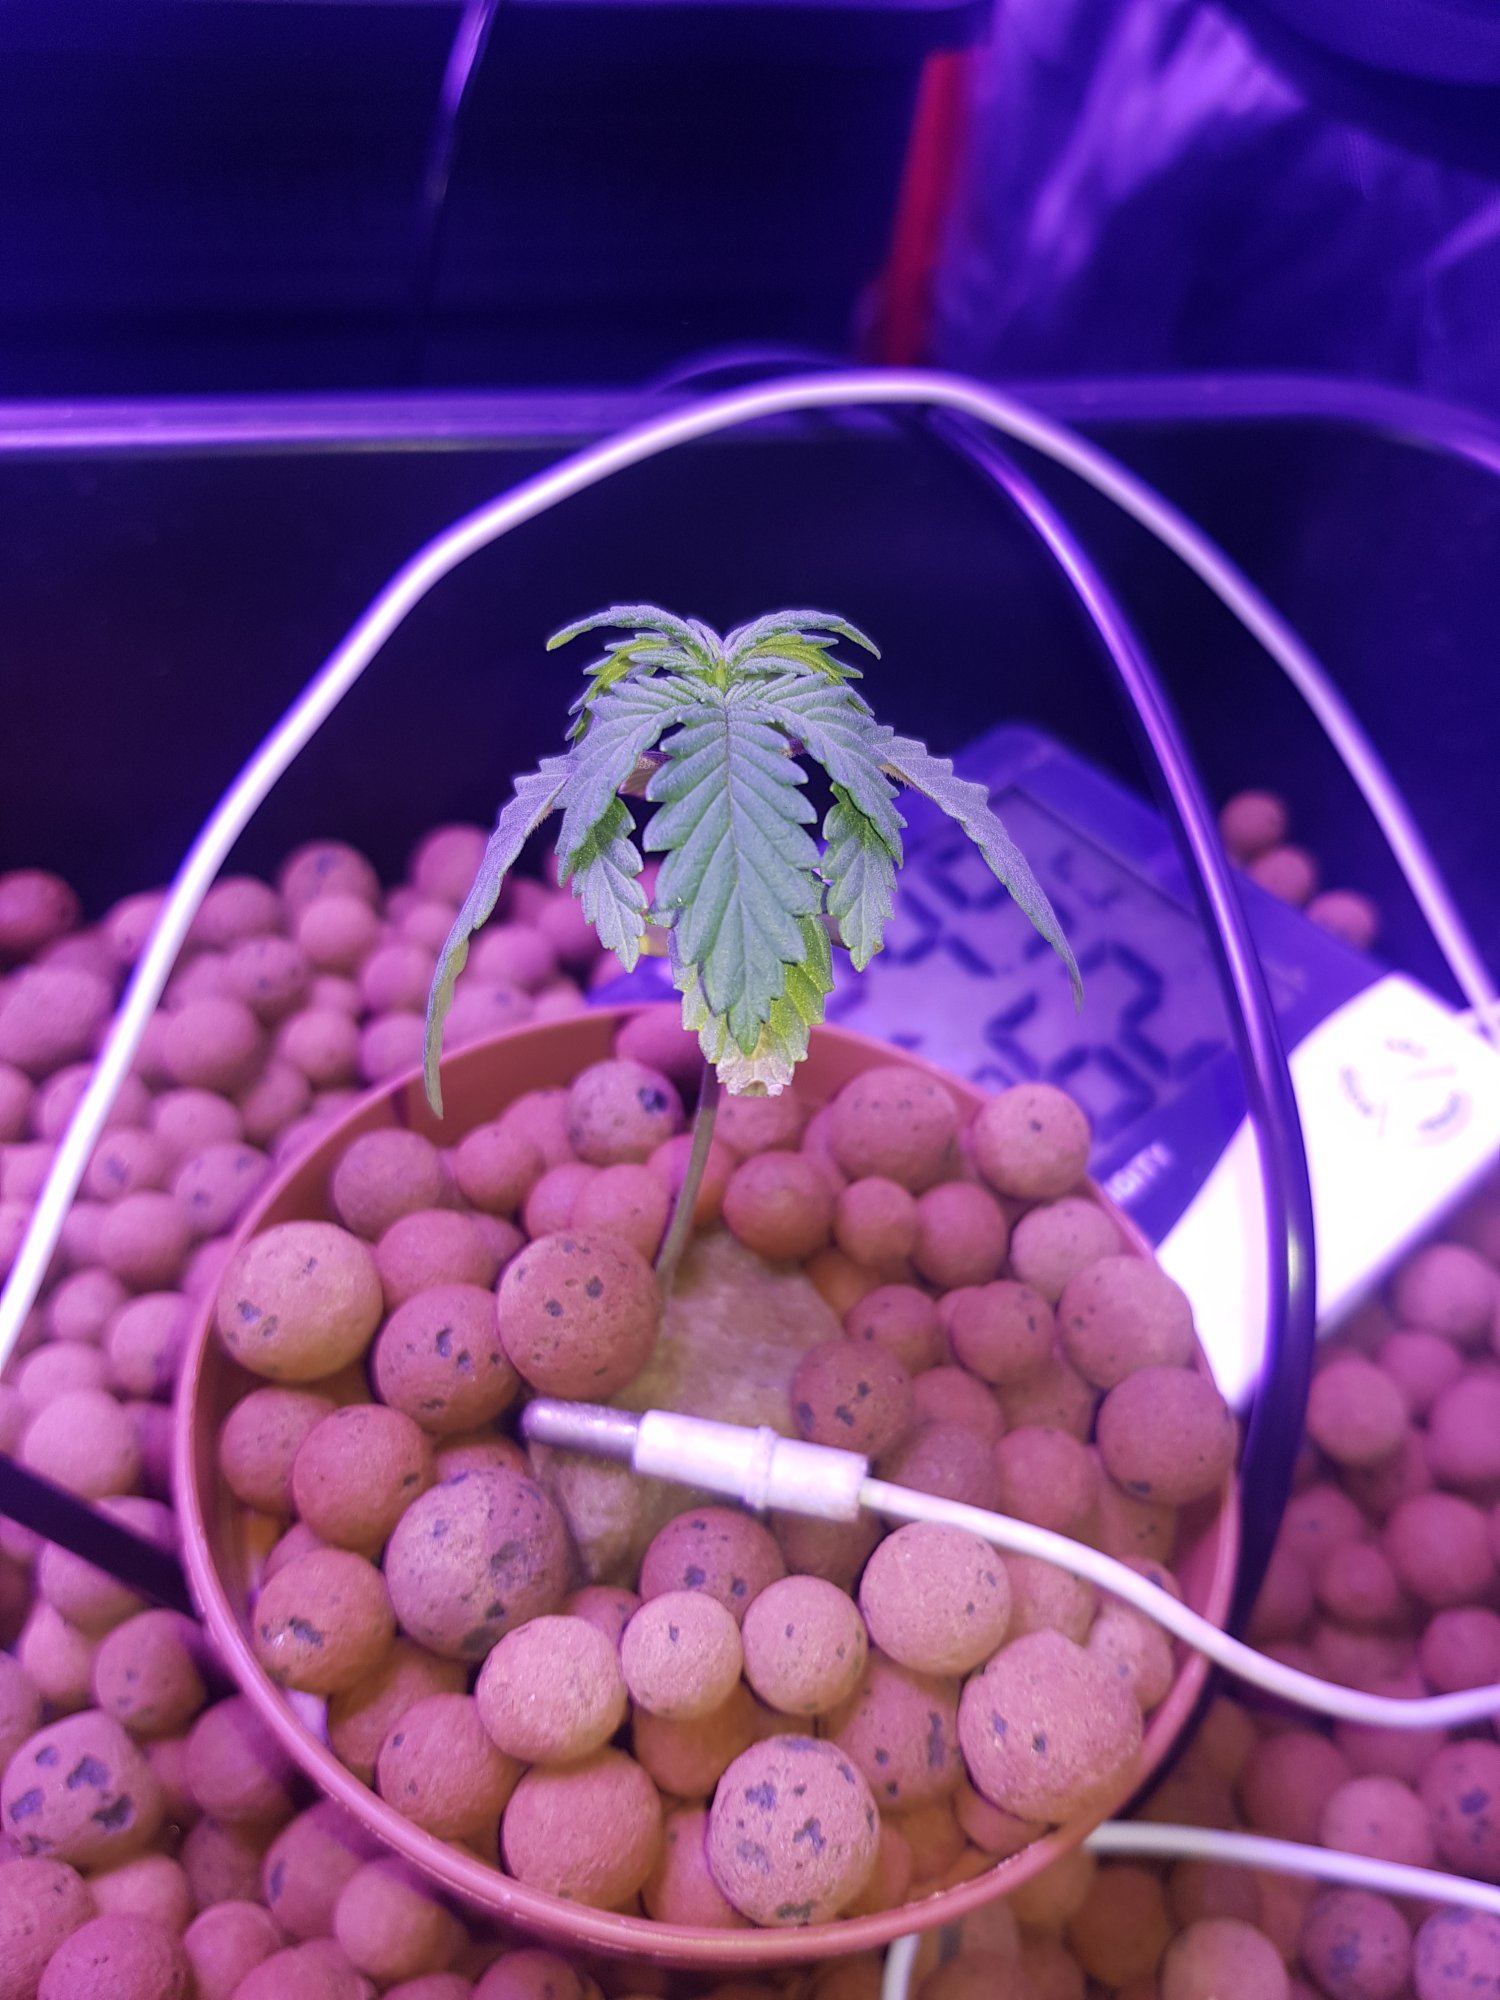 First time hydro already lost one seedling need help asap 3